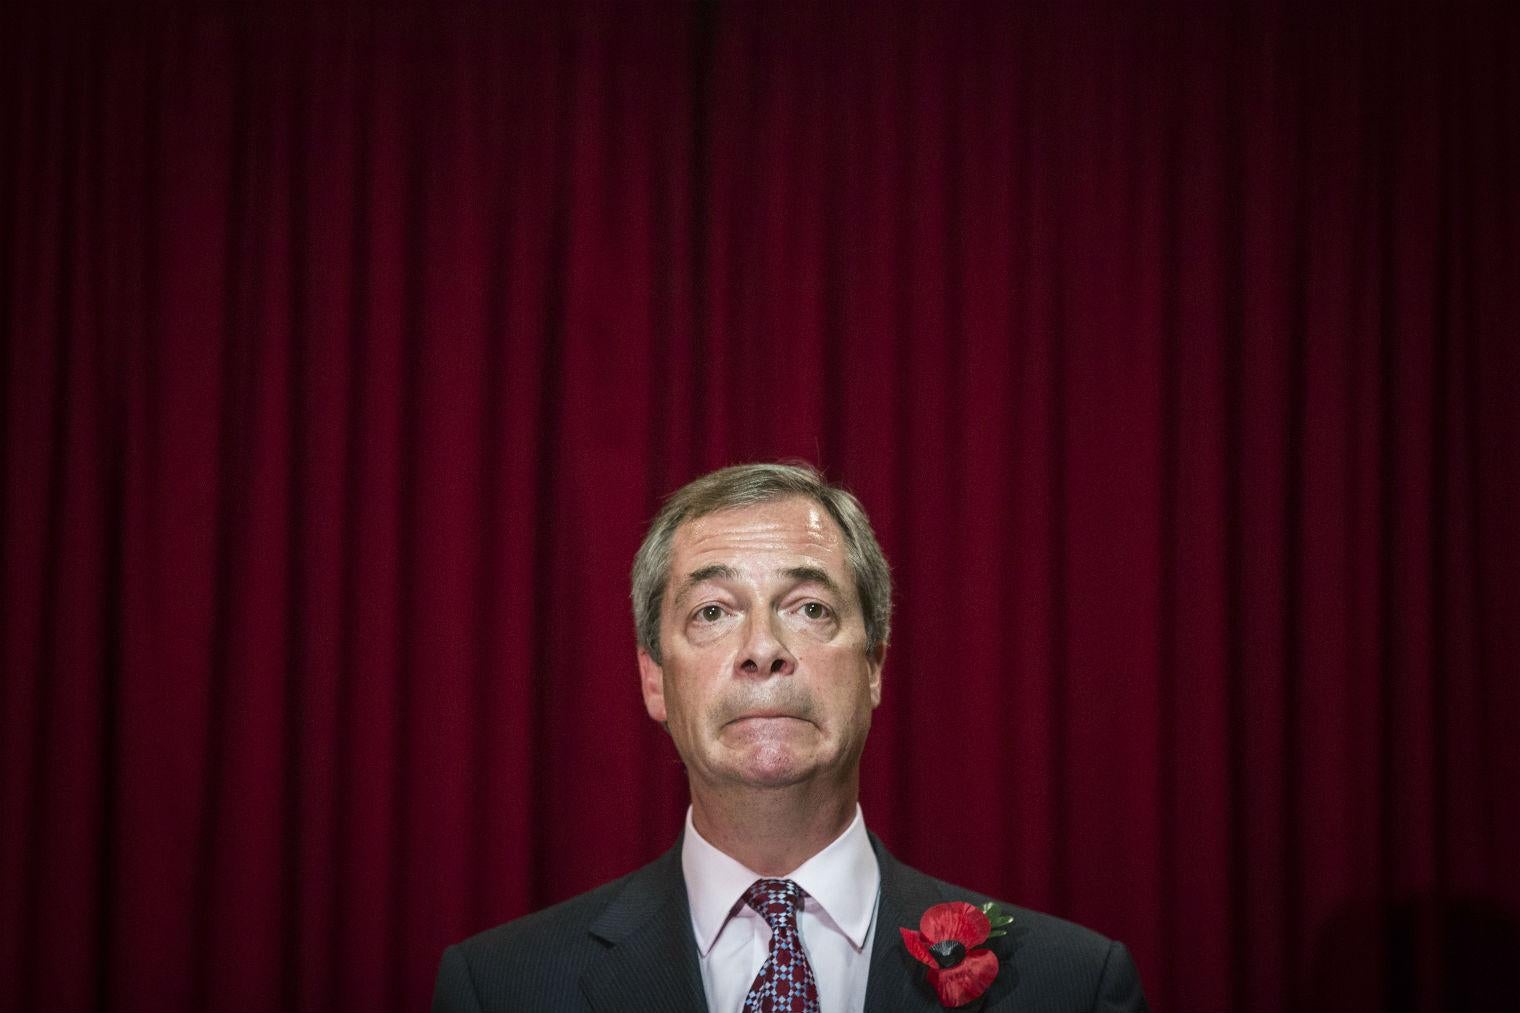 The war is over, arguably, but Farage spies more ‘battles to fight’ ahead and is making his preparations